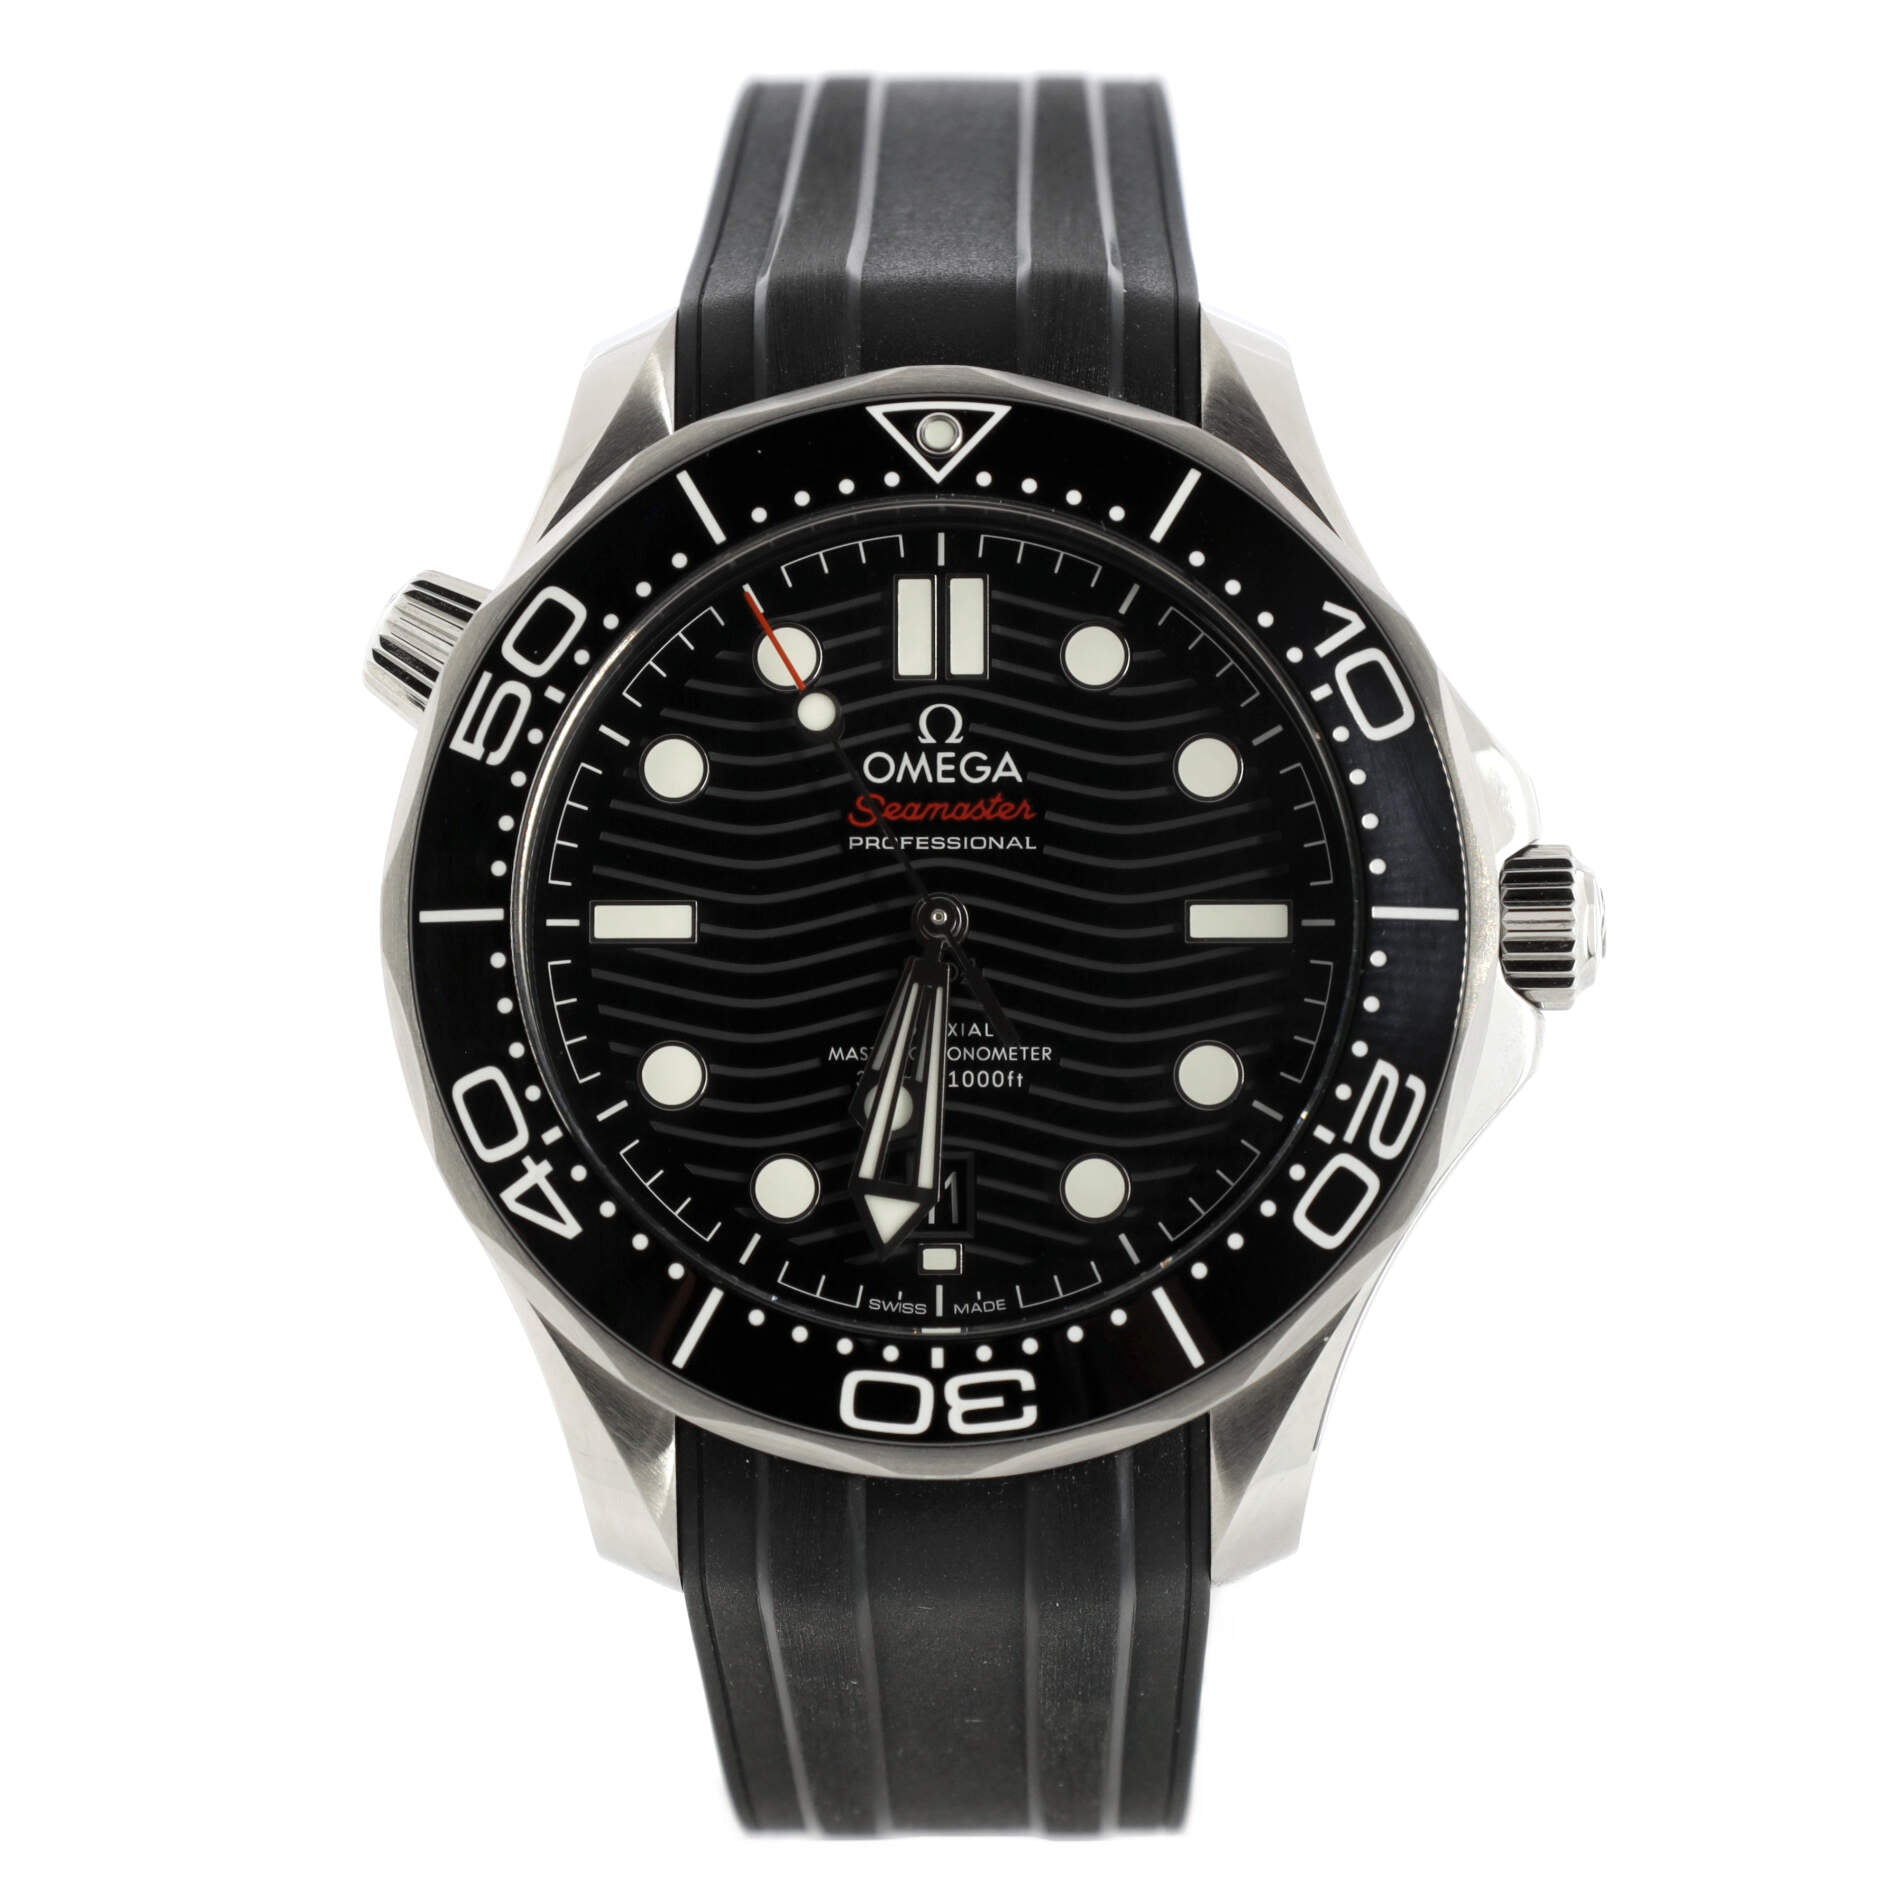 Seamaster Professional Diver 300M Co-Axial Master Chronometer Automatic Watch (21032422001001)